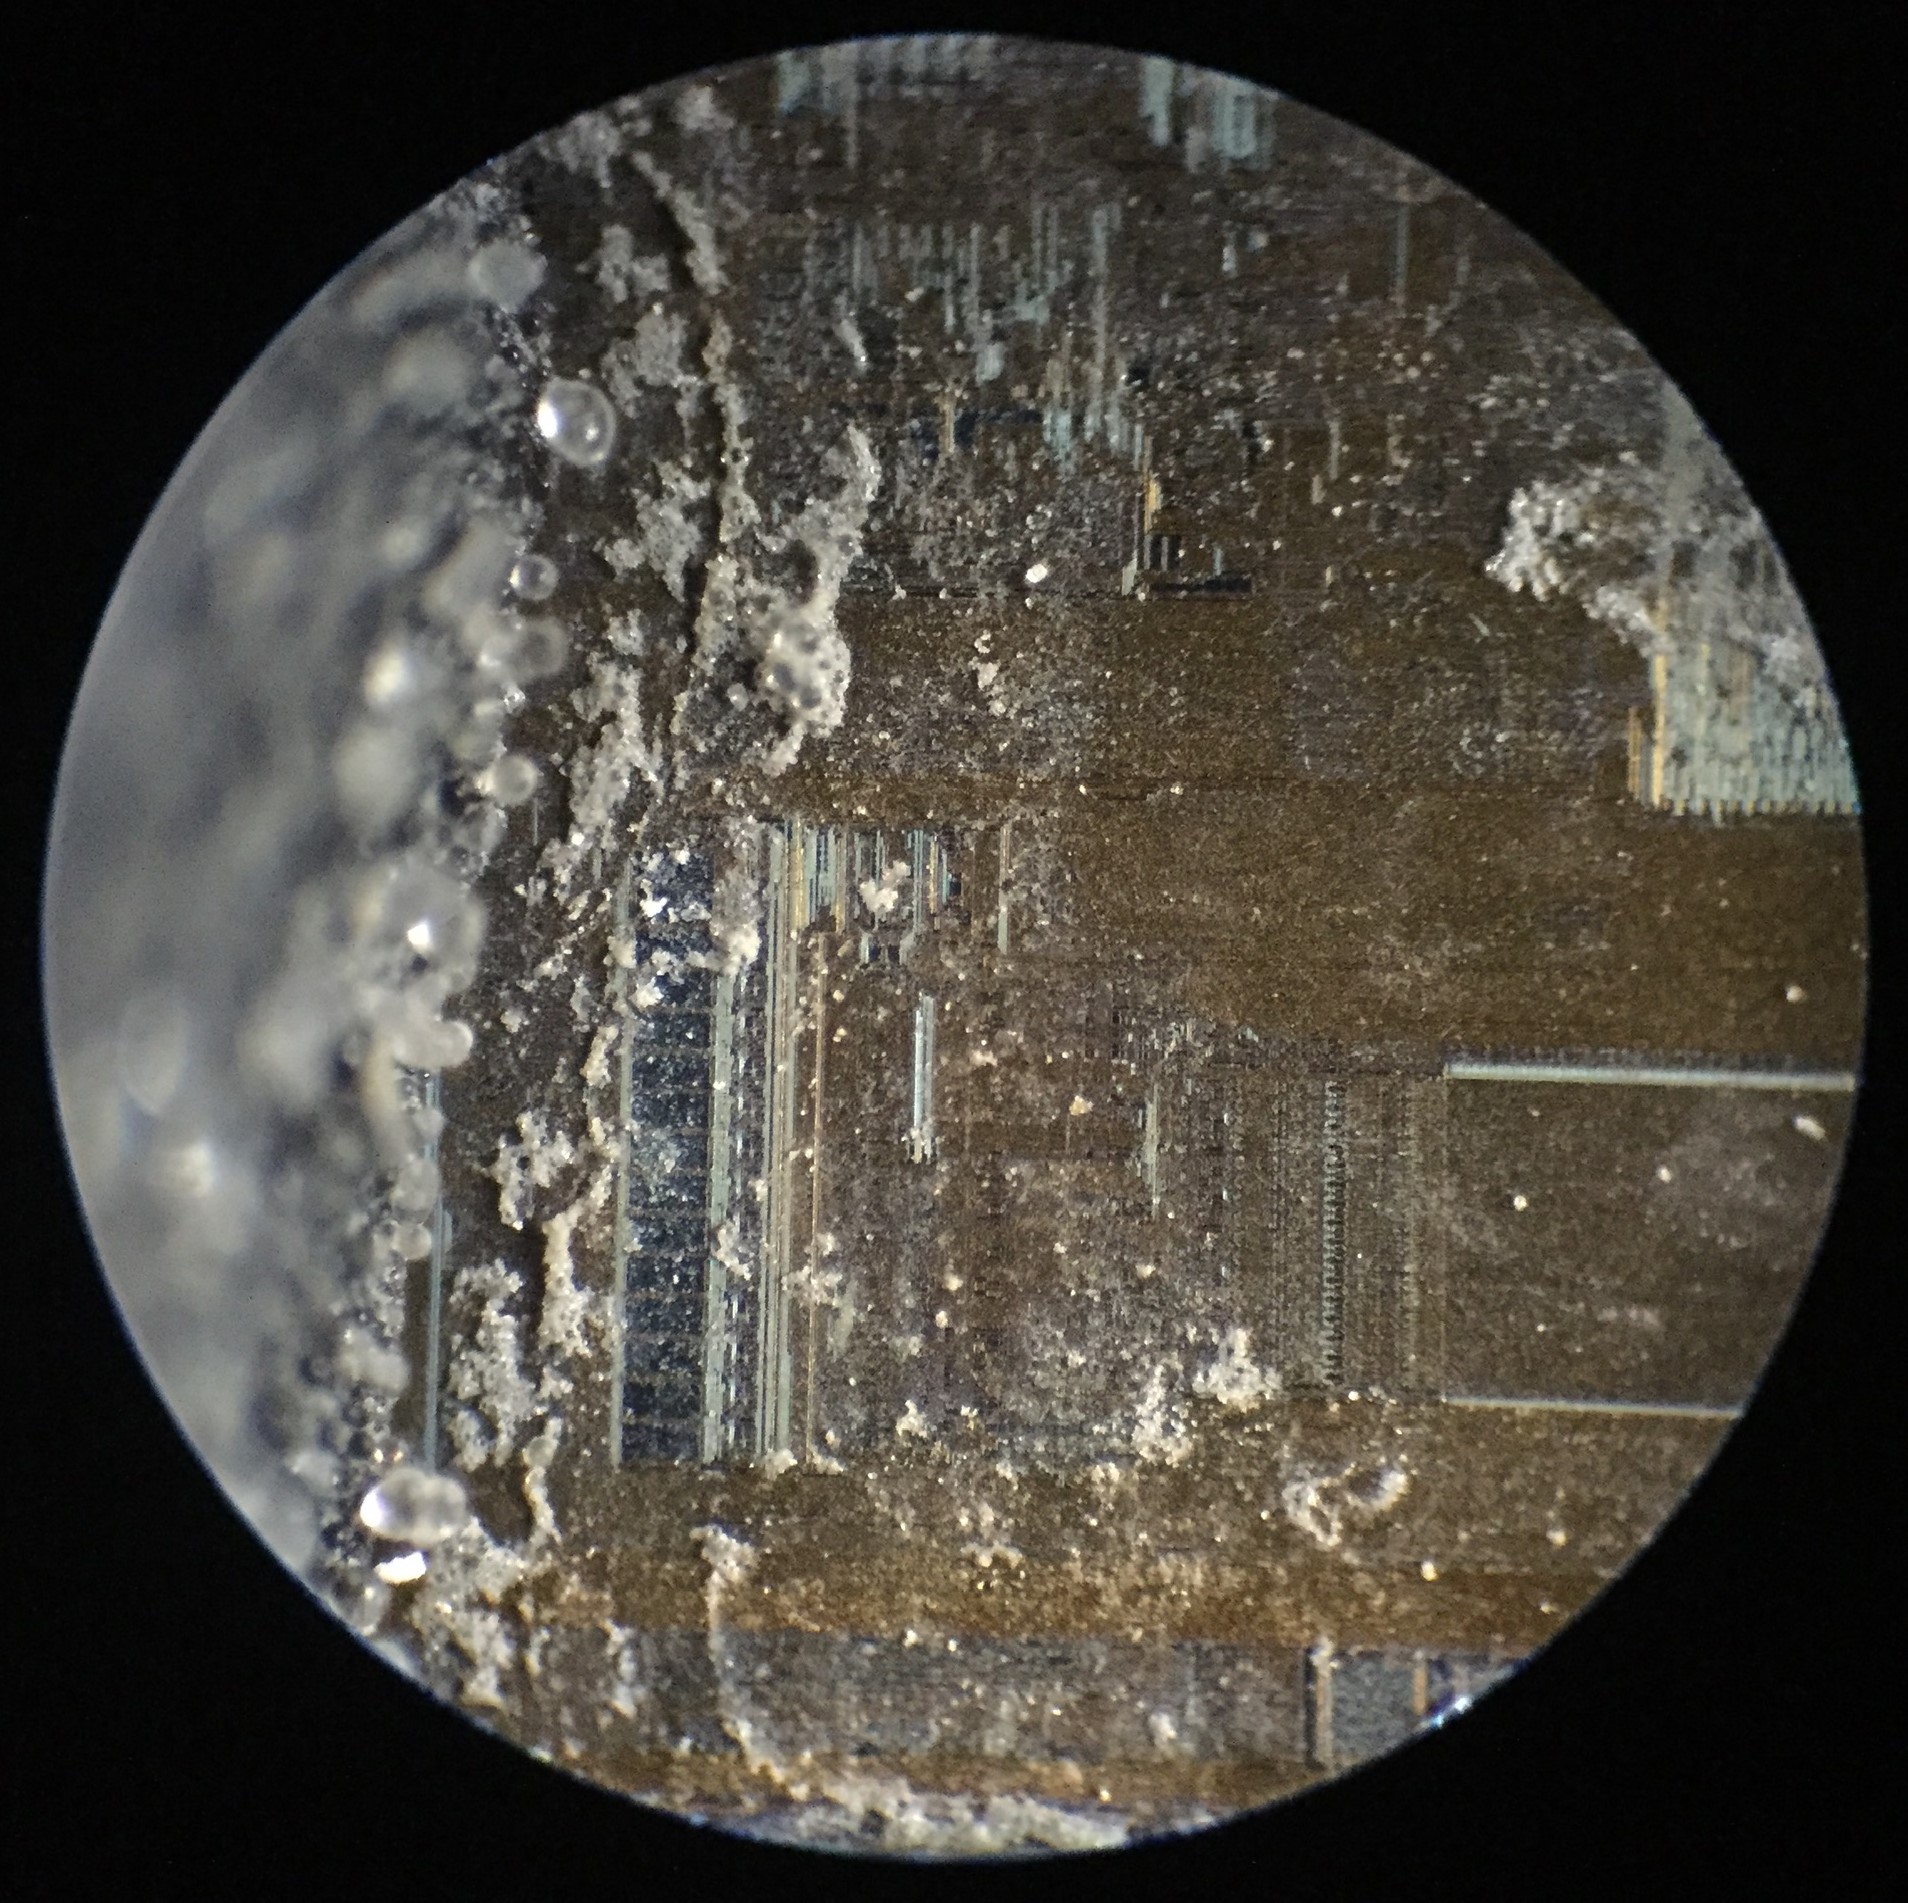 Dry residue over the silicon die under higher magnification